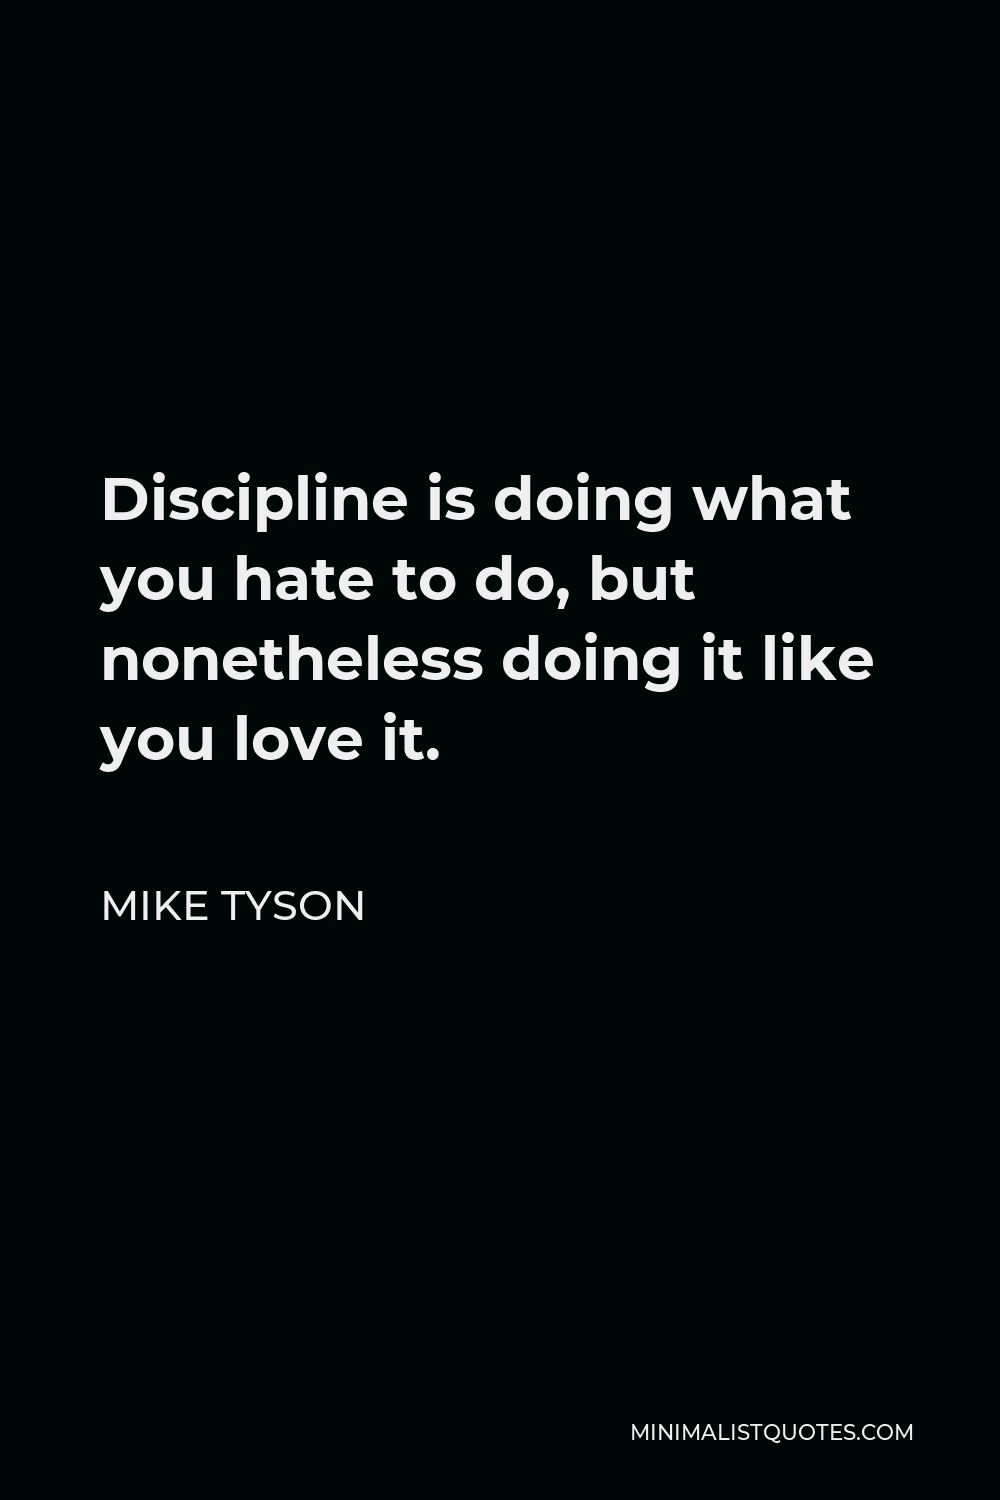 Mike Tyson Quote: Discipline is doing what you hate to do, but ...